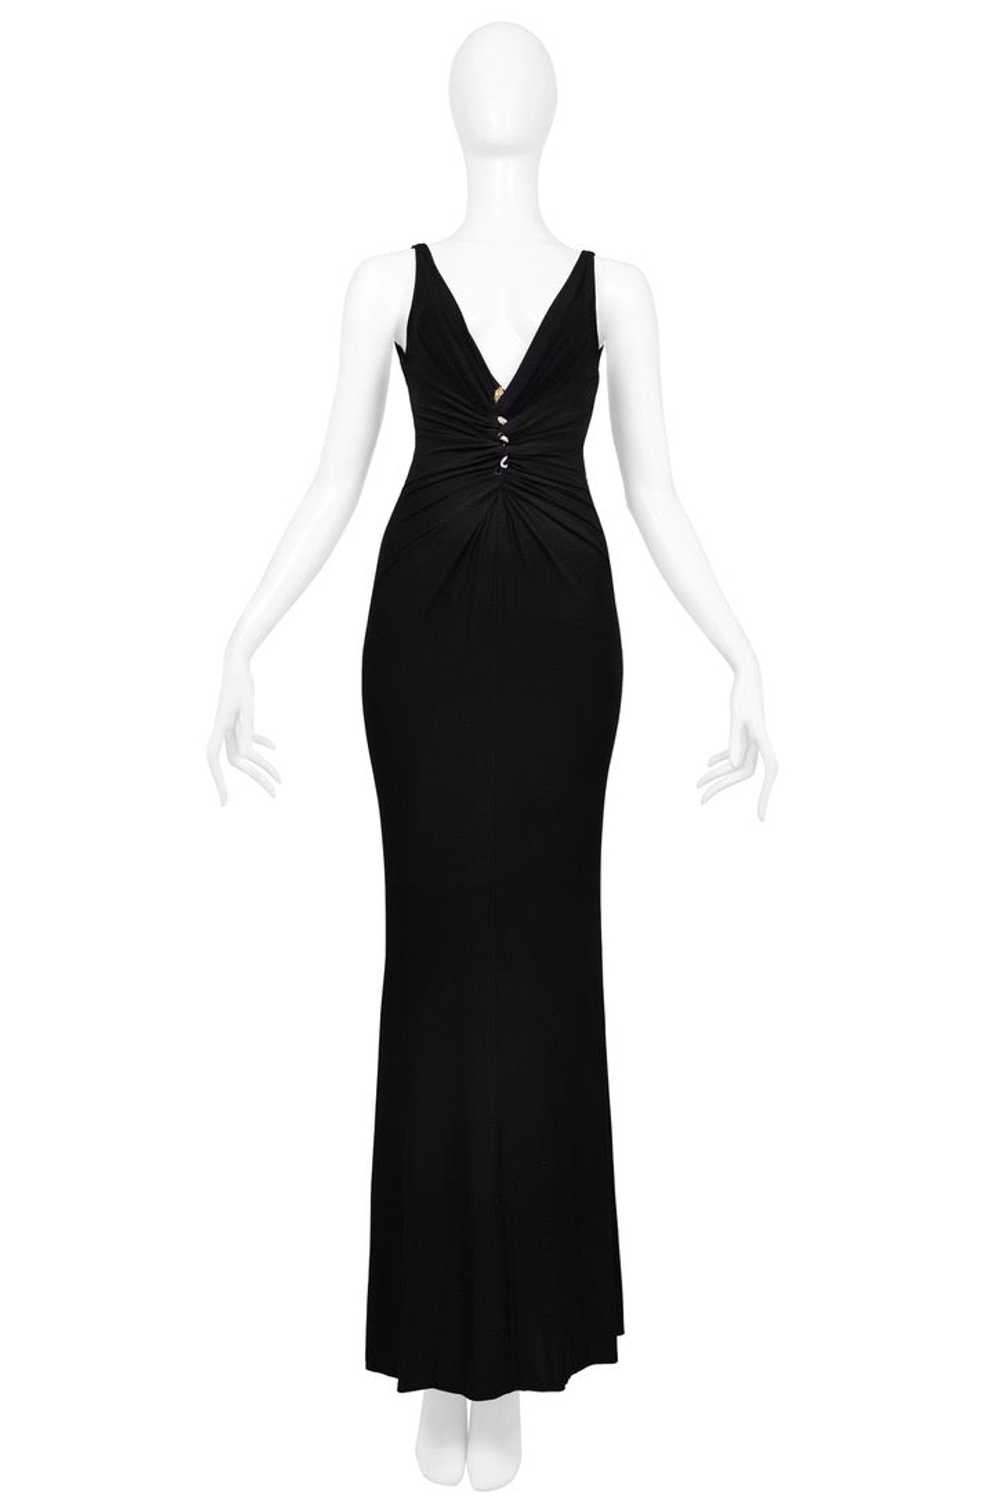 ROBERTO CAVALLI BLACK JERSEY EVENING GOWN WITH GO… - image 3